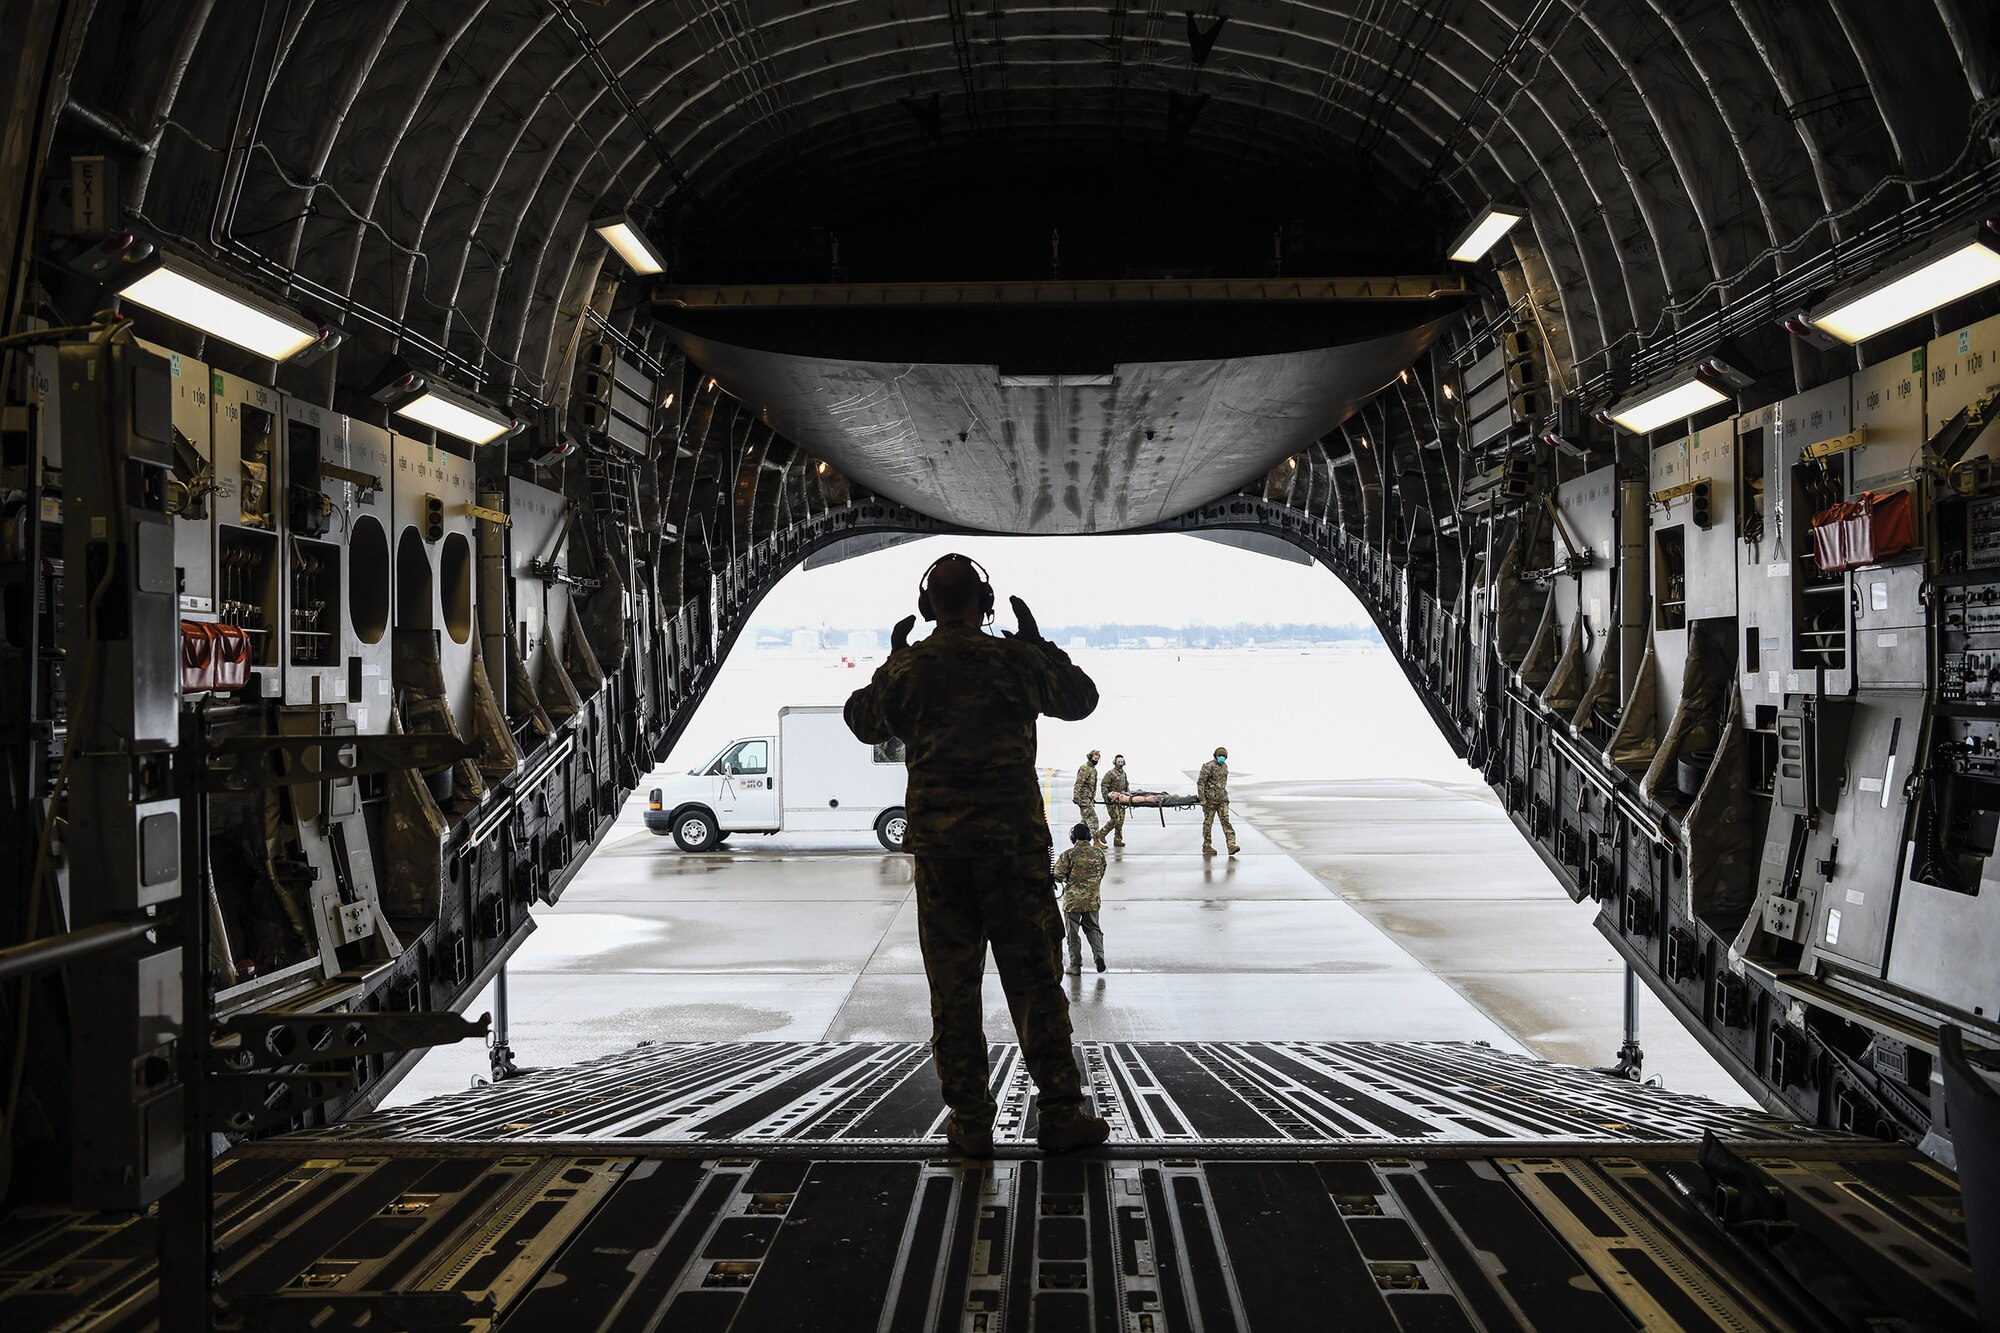 Members of the 445th Aeromedical Evacuation Squadron load a 445th Airlift Wing C-17 Globemaster III with medical equipment during a local mission training sortie, Feb. 11, 2021. The cargo area of the C-17 can hold 36 litters and 54 ambulatory patients and attendants with a basic crew of five, two flight nurses and three medical technicians for aeromedical evacuations.